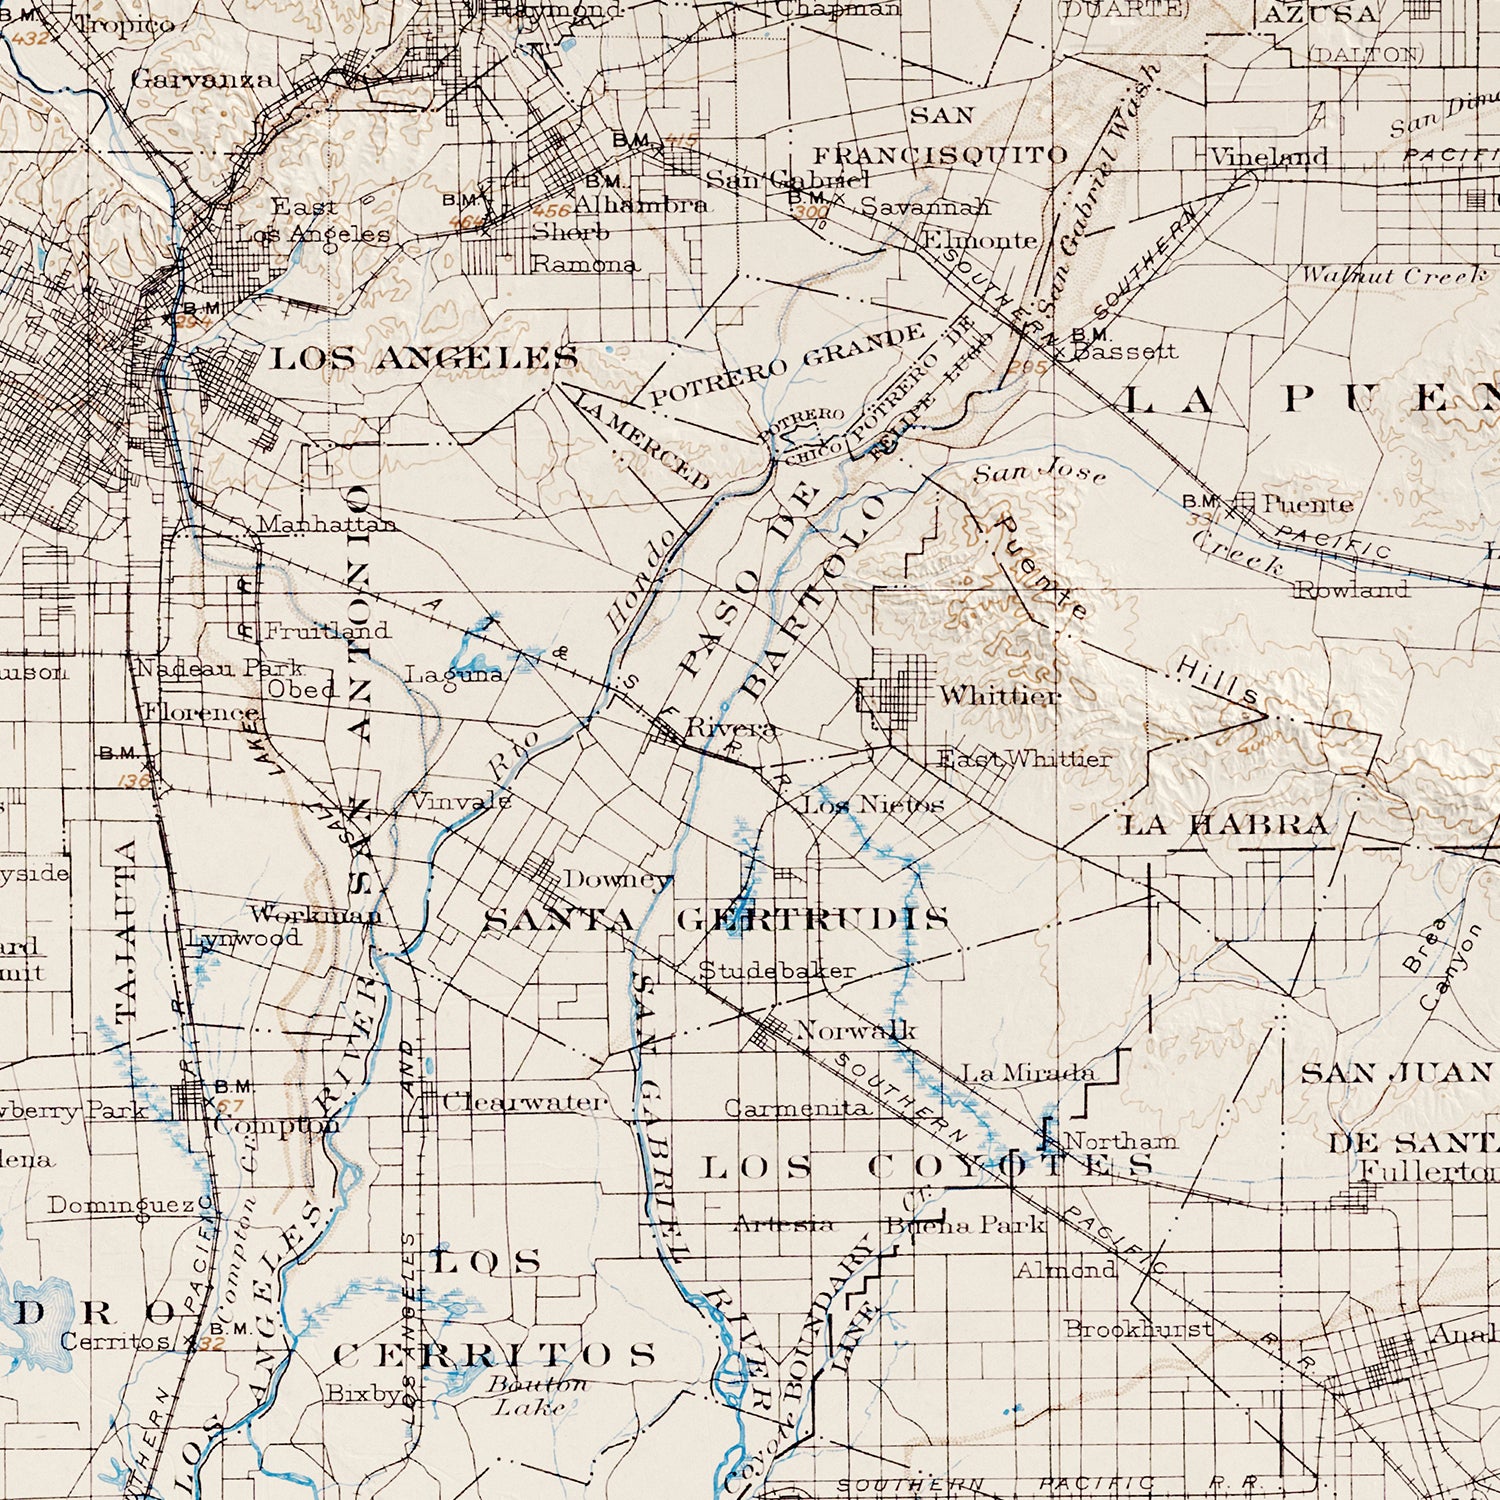 Los Angeles, CA - Vintage Shaded Relief Map (1901)